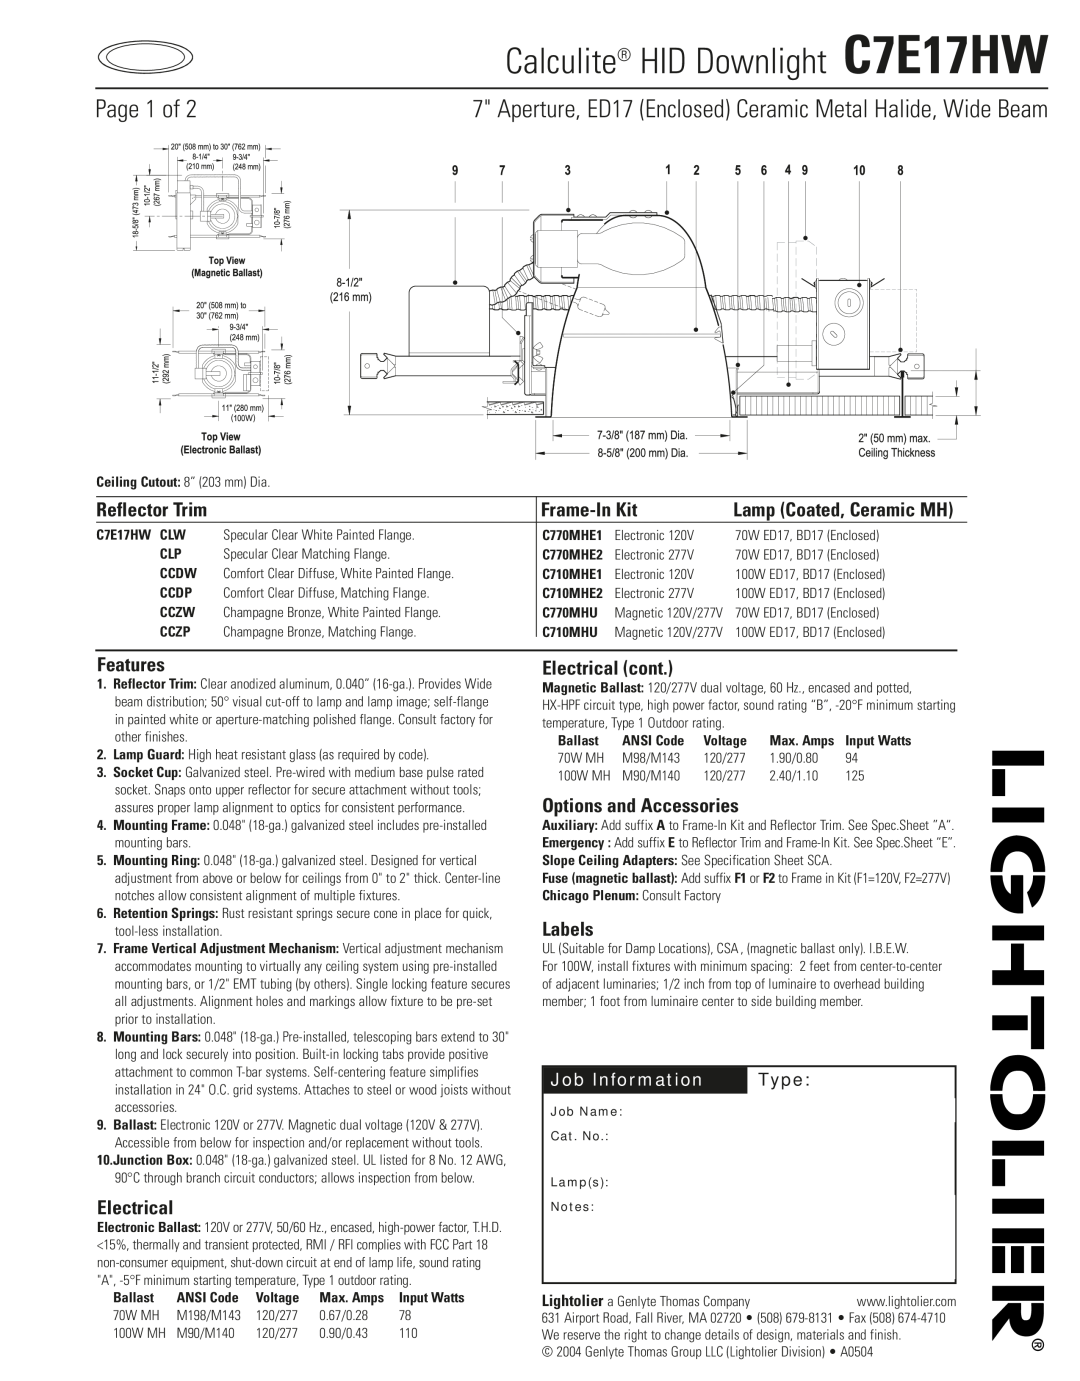 Lightolier specifications Calculite HID Downlight C7E17HW, Page 1 of, Job Information, Type, Lamp Coated, Ceramic MH 